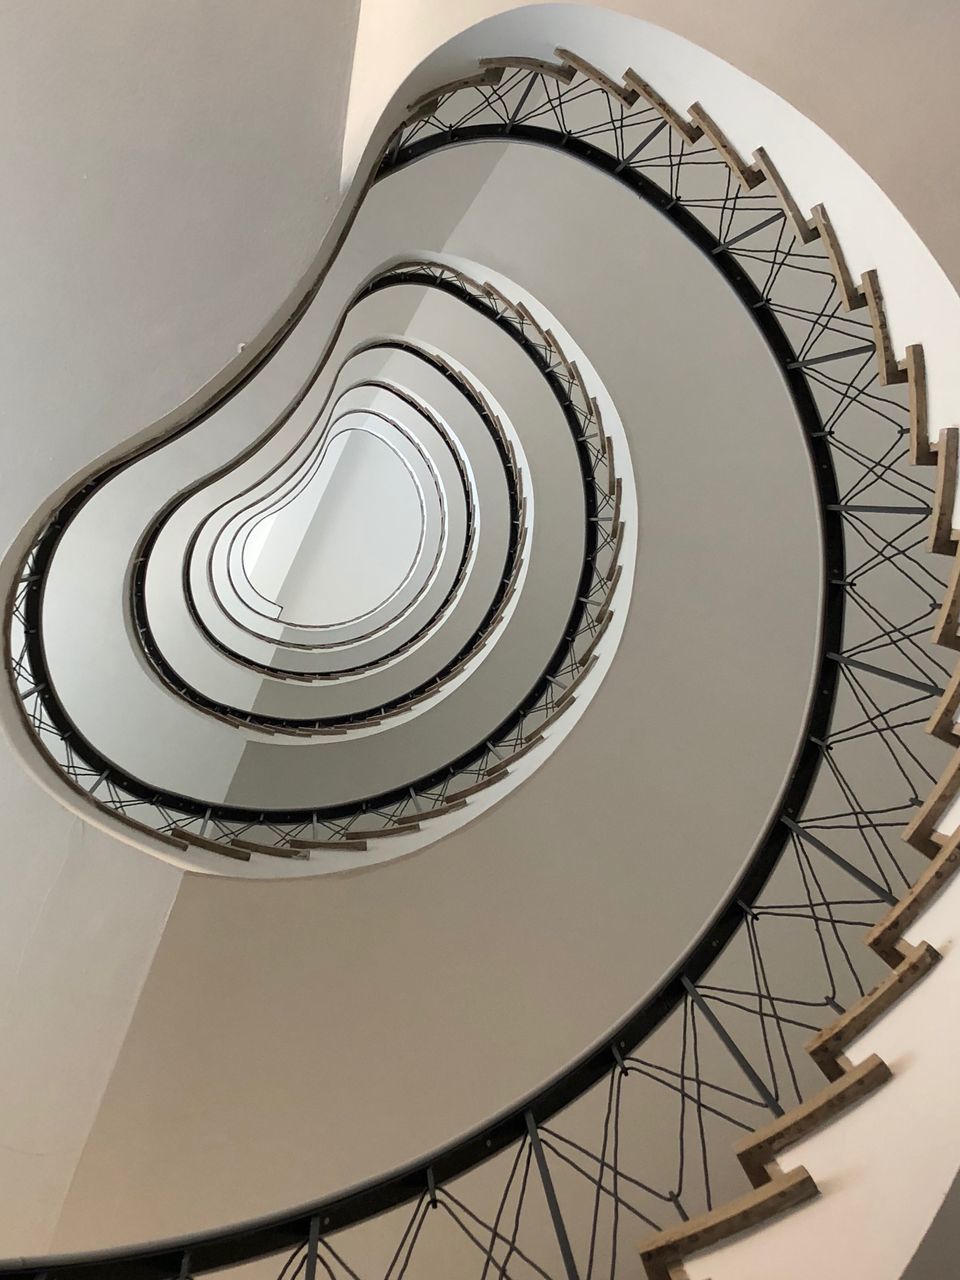 staircase, steps and staircases, architecture, spiral, built structure, railing, spiral staircase, low angle view, no people, pattern, indoors, design, directly below, shape, architectural feature, day, geometric shape, diminishing perspective, building, metal, ceiling